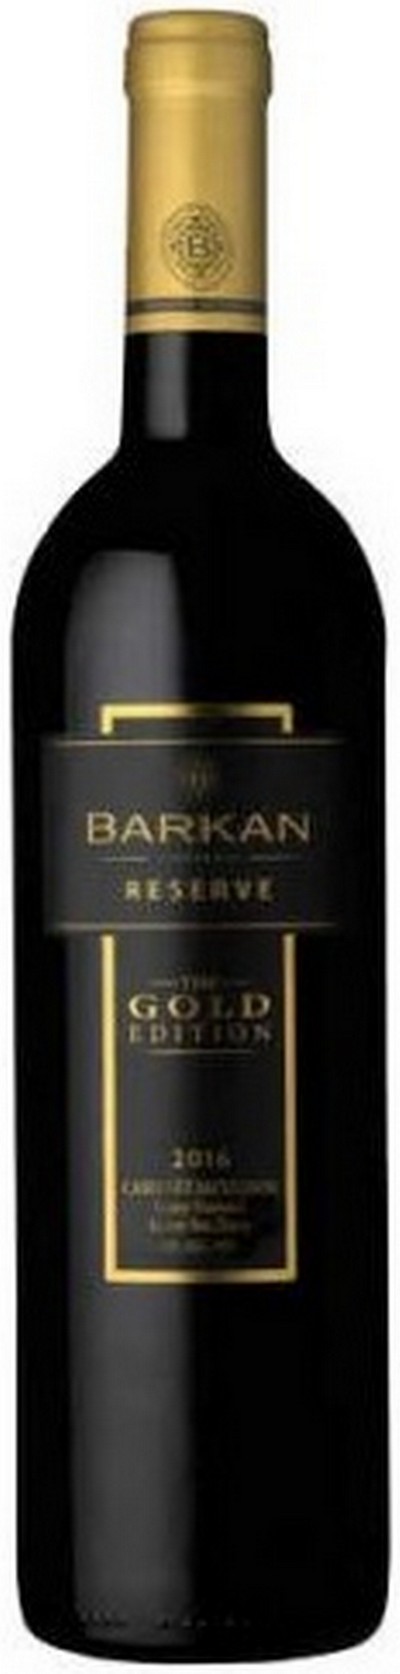 barkan-reserve-the-gold-edition-2018